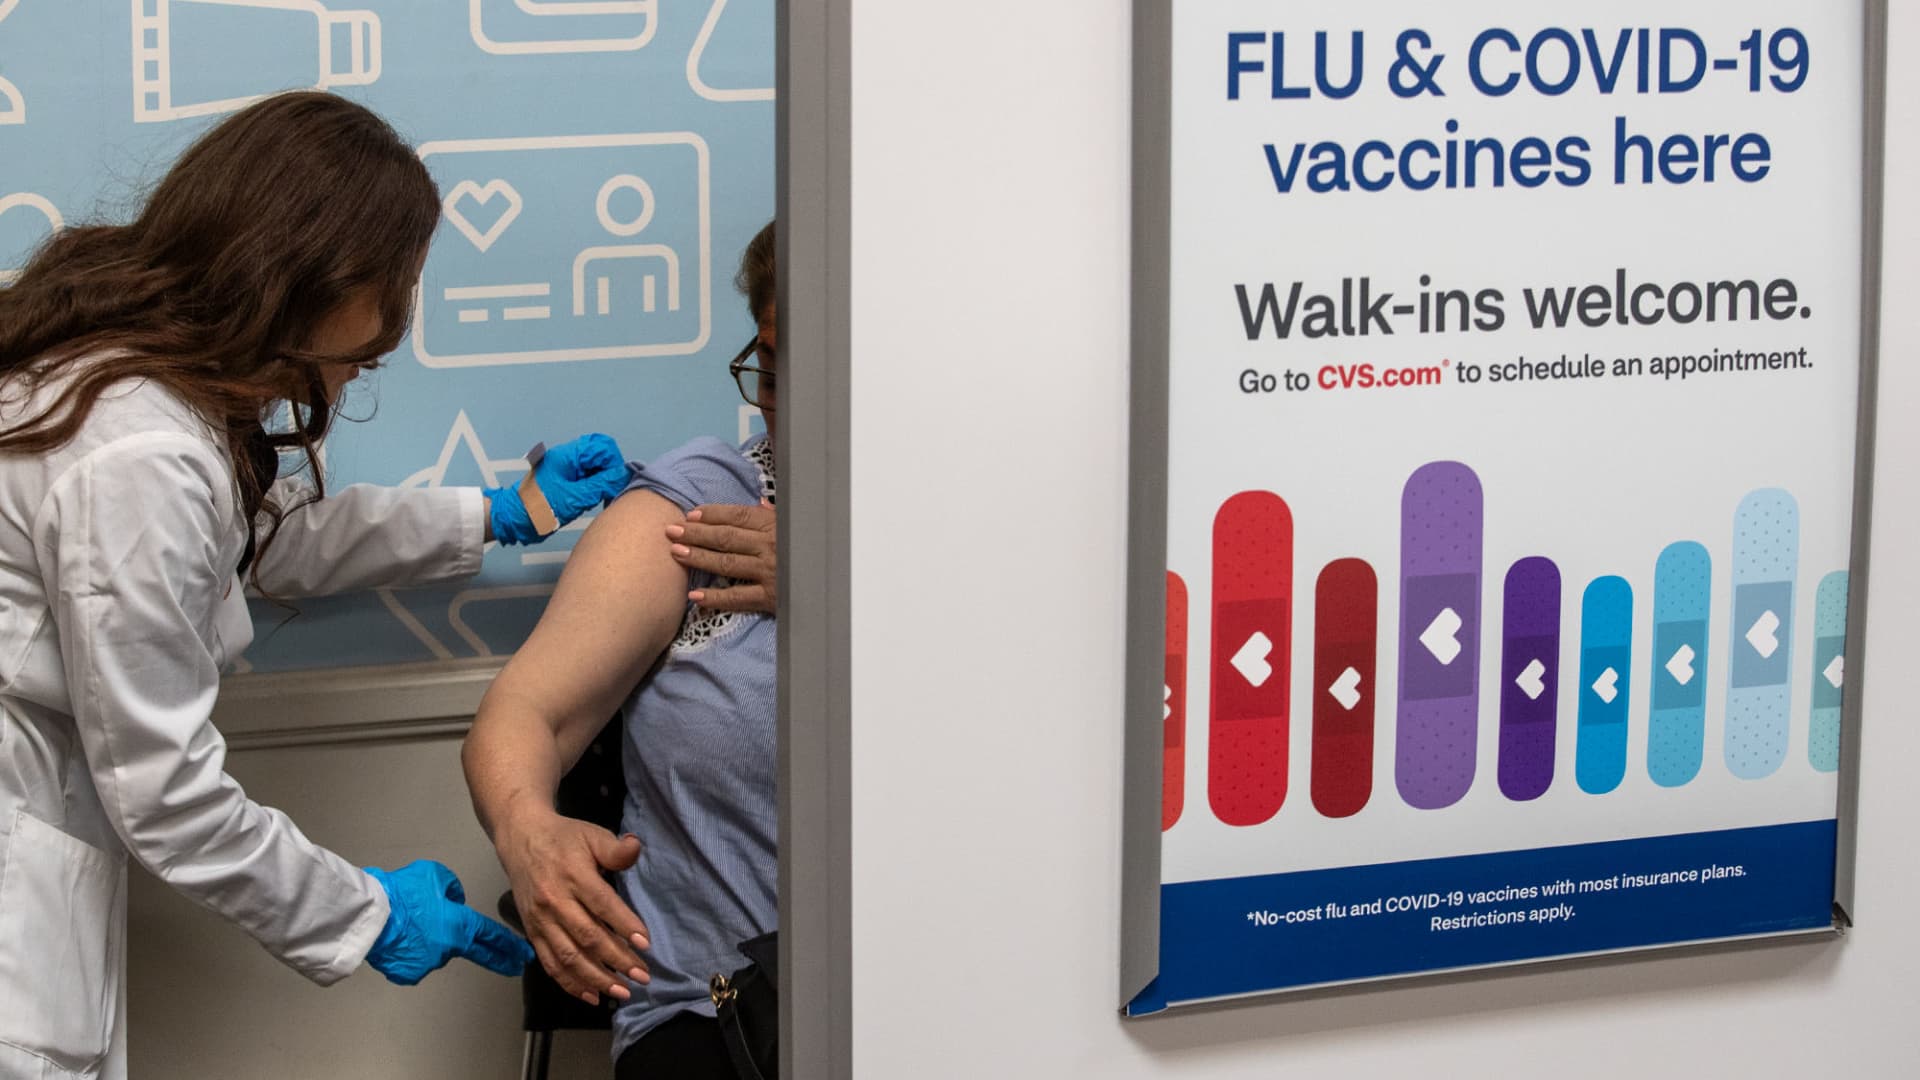 Covid, RSV and flu vaccines are now available — here’s how to decide whether to get them together